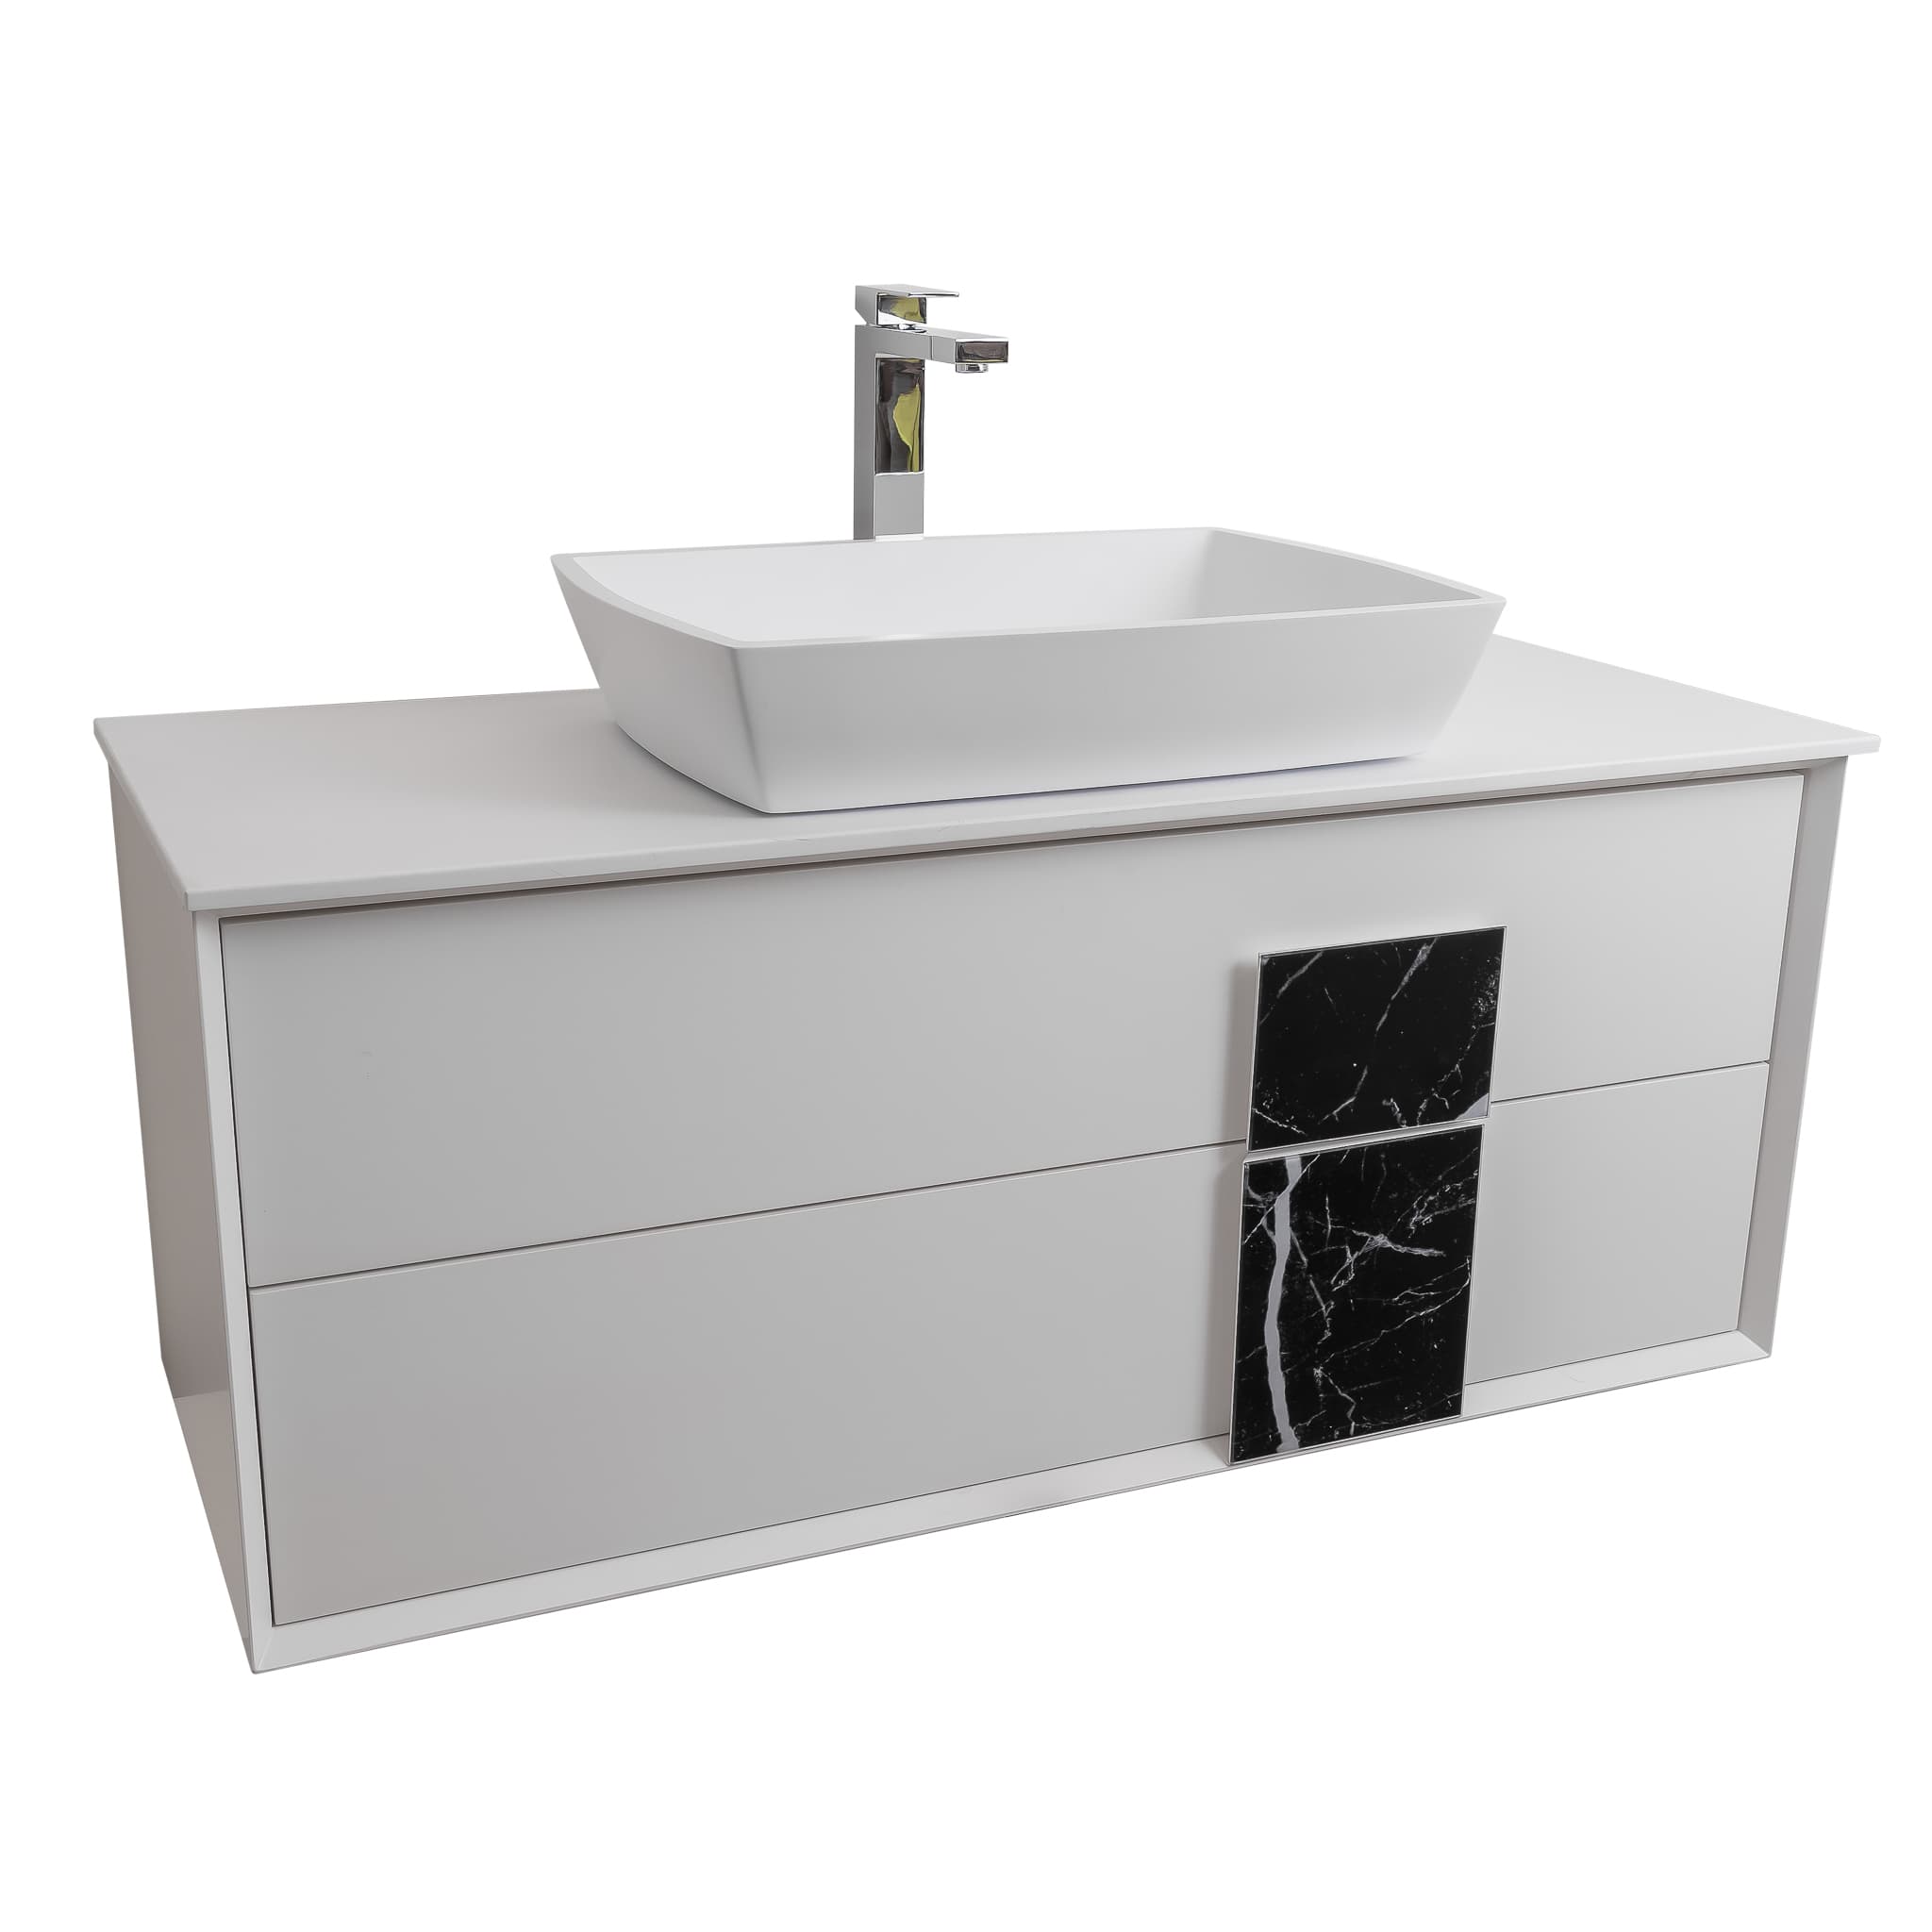 Piazza 47.5 Matte White With Black Marble Handle Cabinet, Solid Surface Flat White Counter and Square Solid Surface White Basin 1316, Wall Mounted Modern Vanity Set